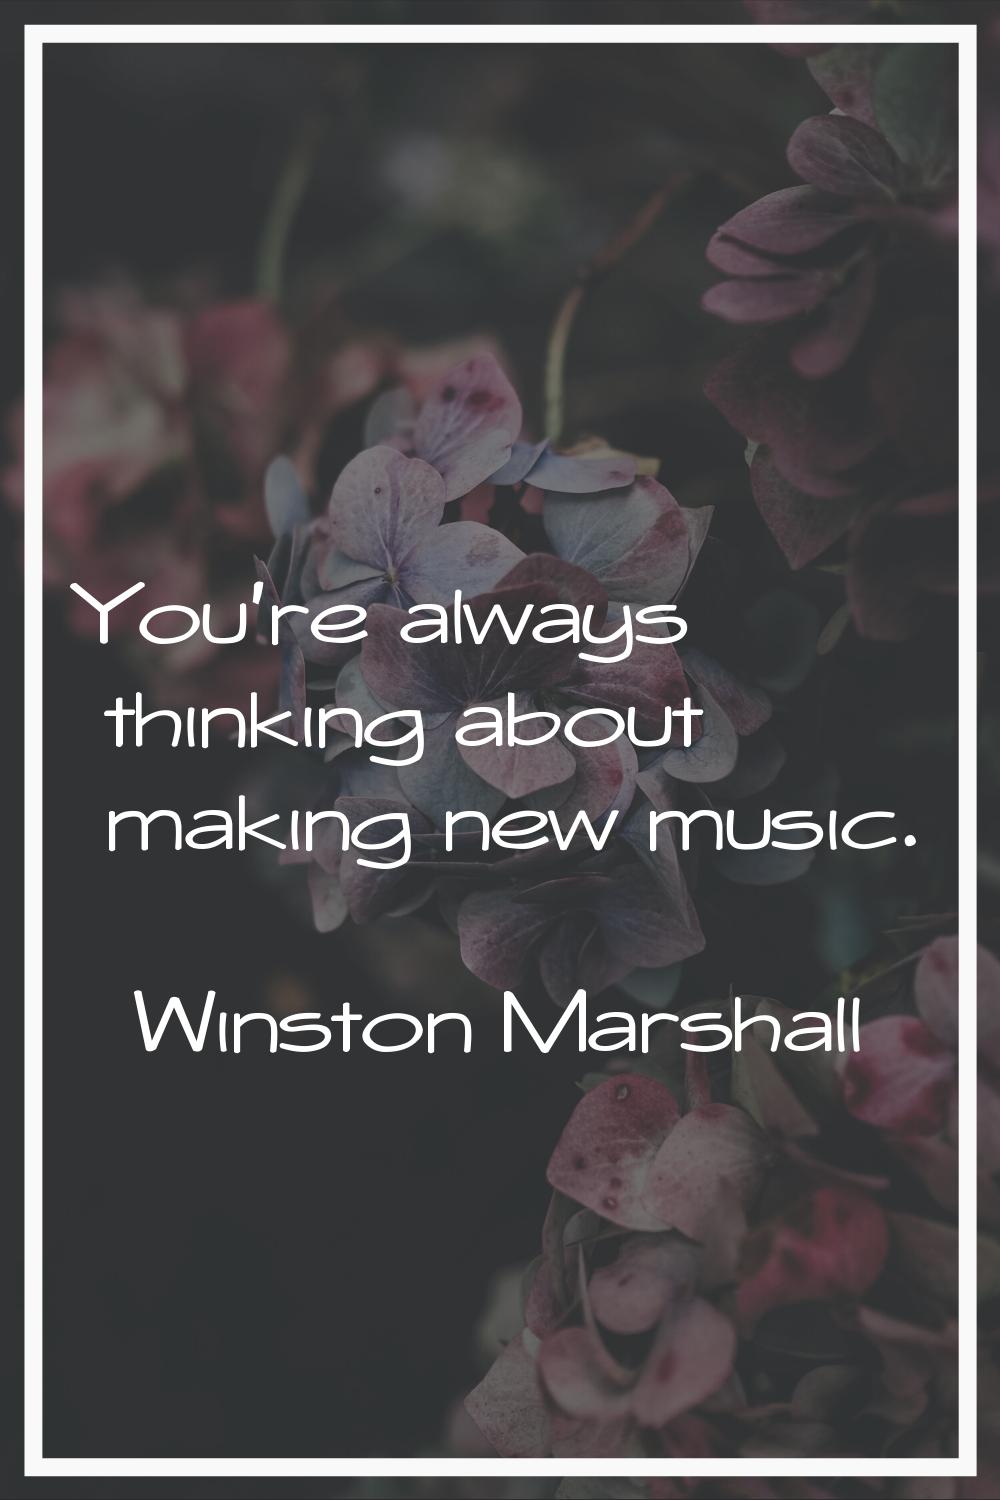 You're always thinking about making new music.